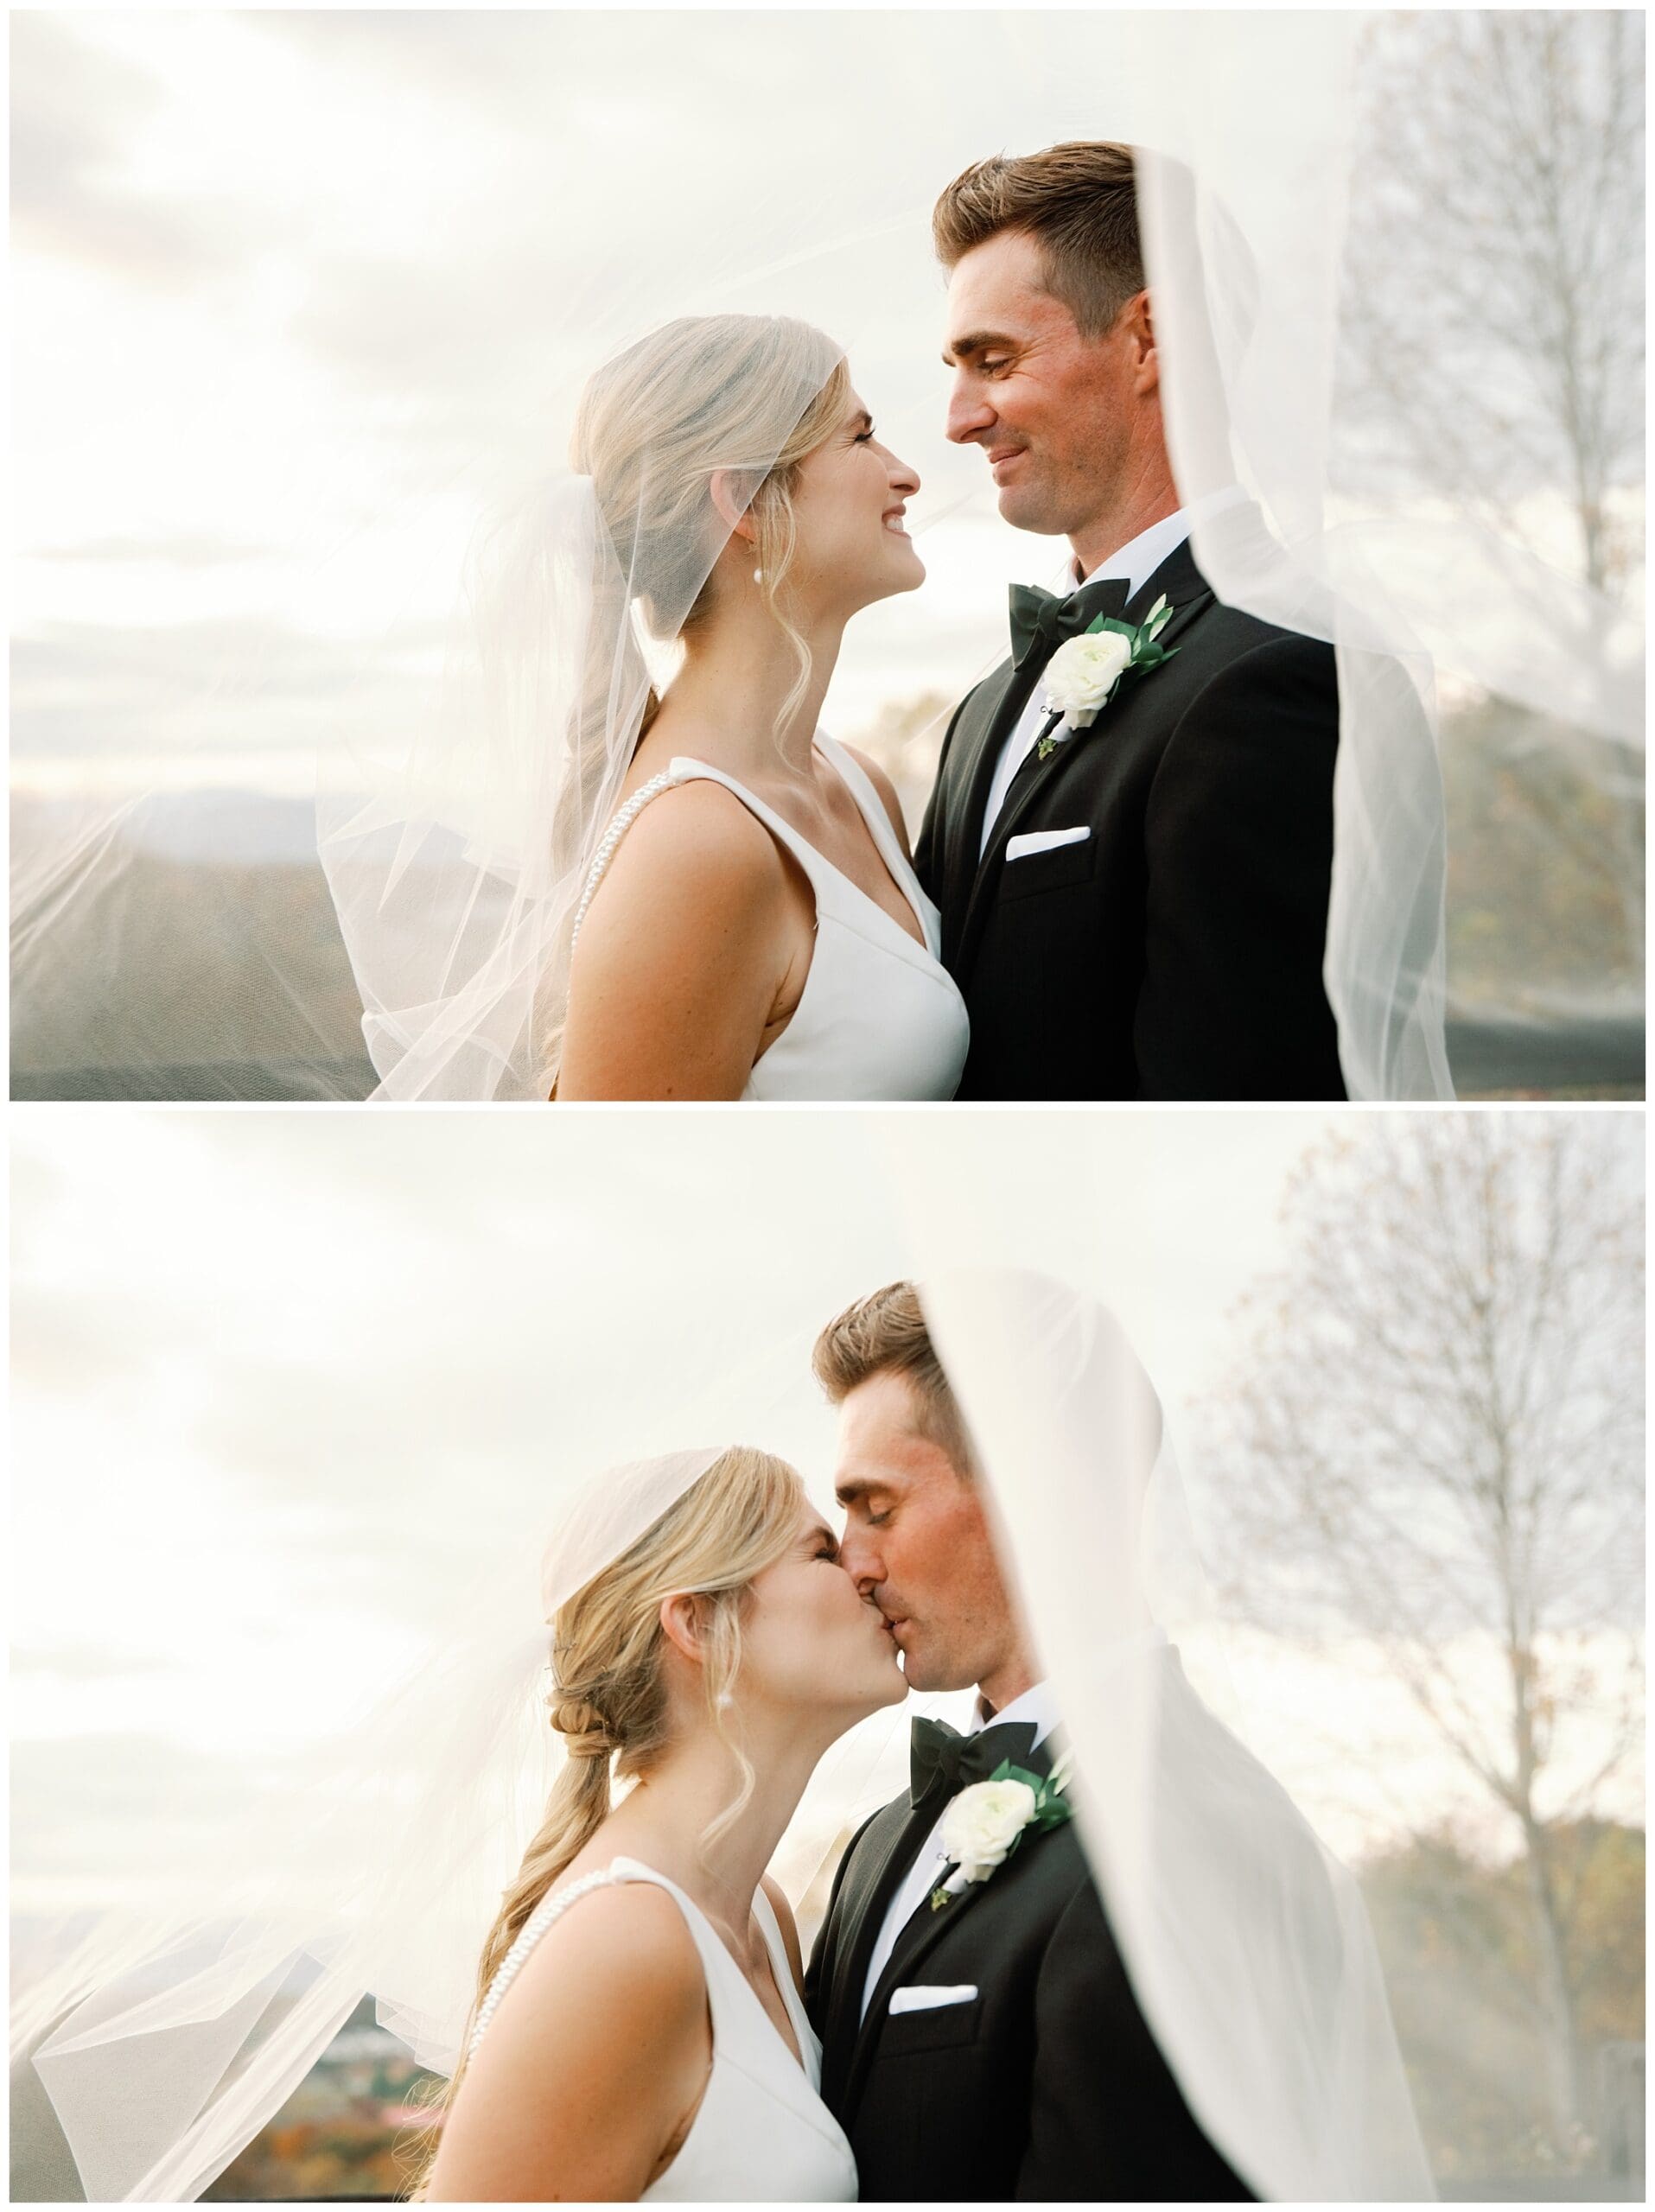 A bride and groom sharing a romantic kiss under a veil at their beautiful fall wedding at Crest Center.